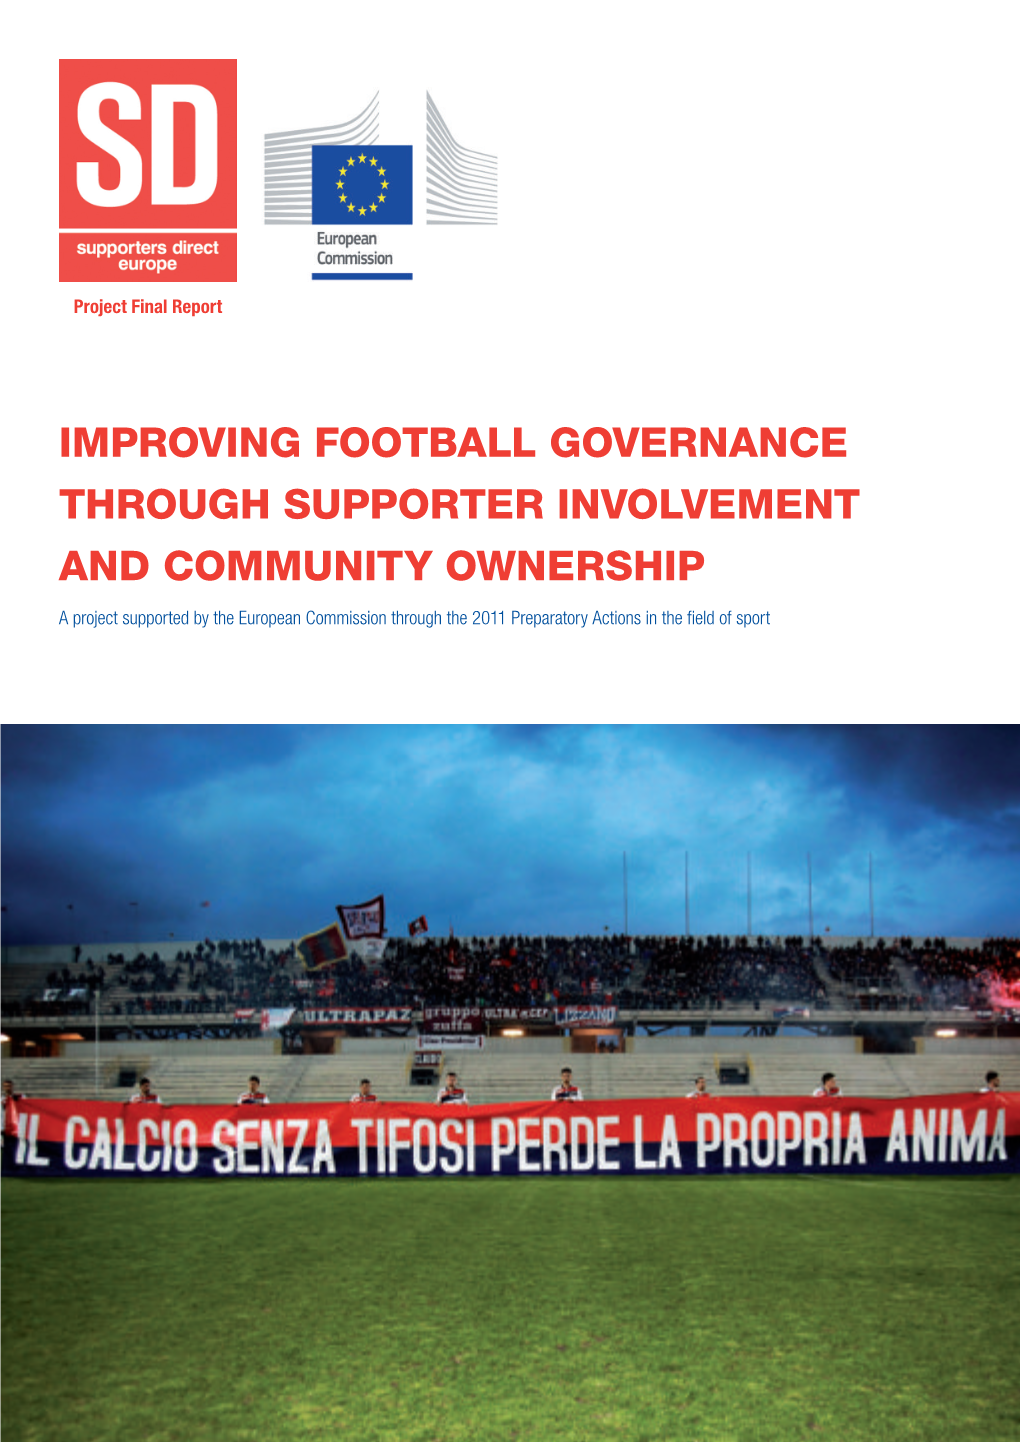 Improving Football Governance Through Supporter Involvement and Community Ownership